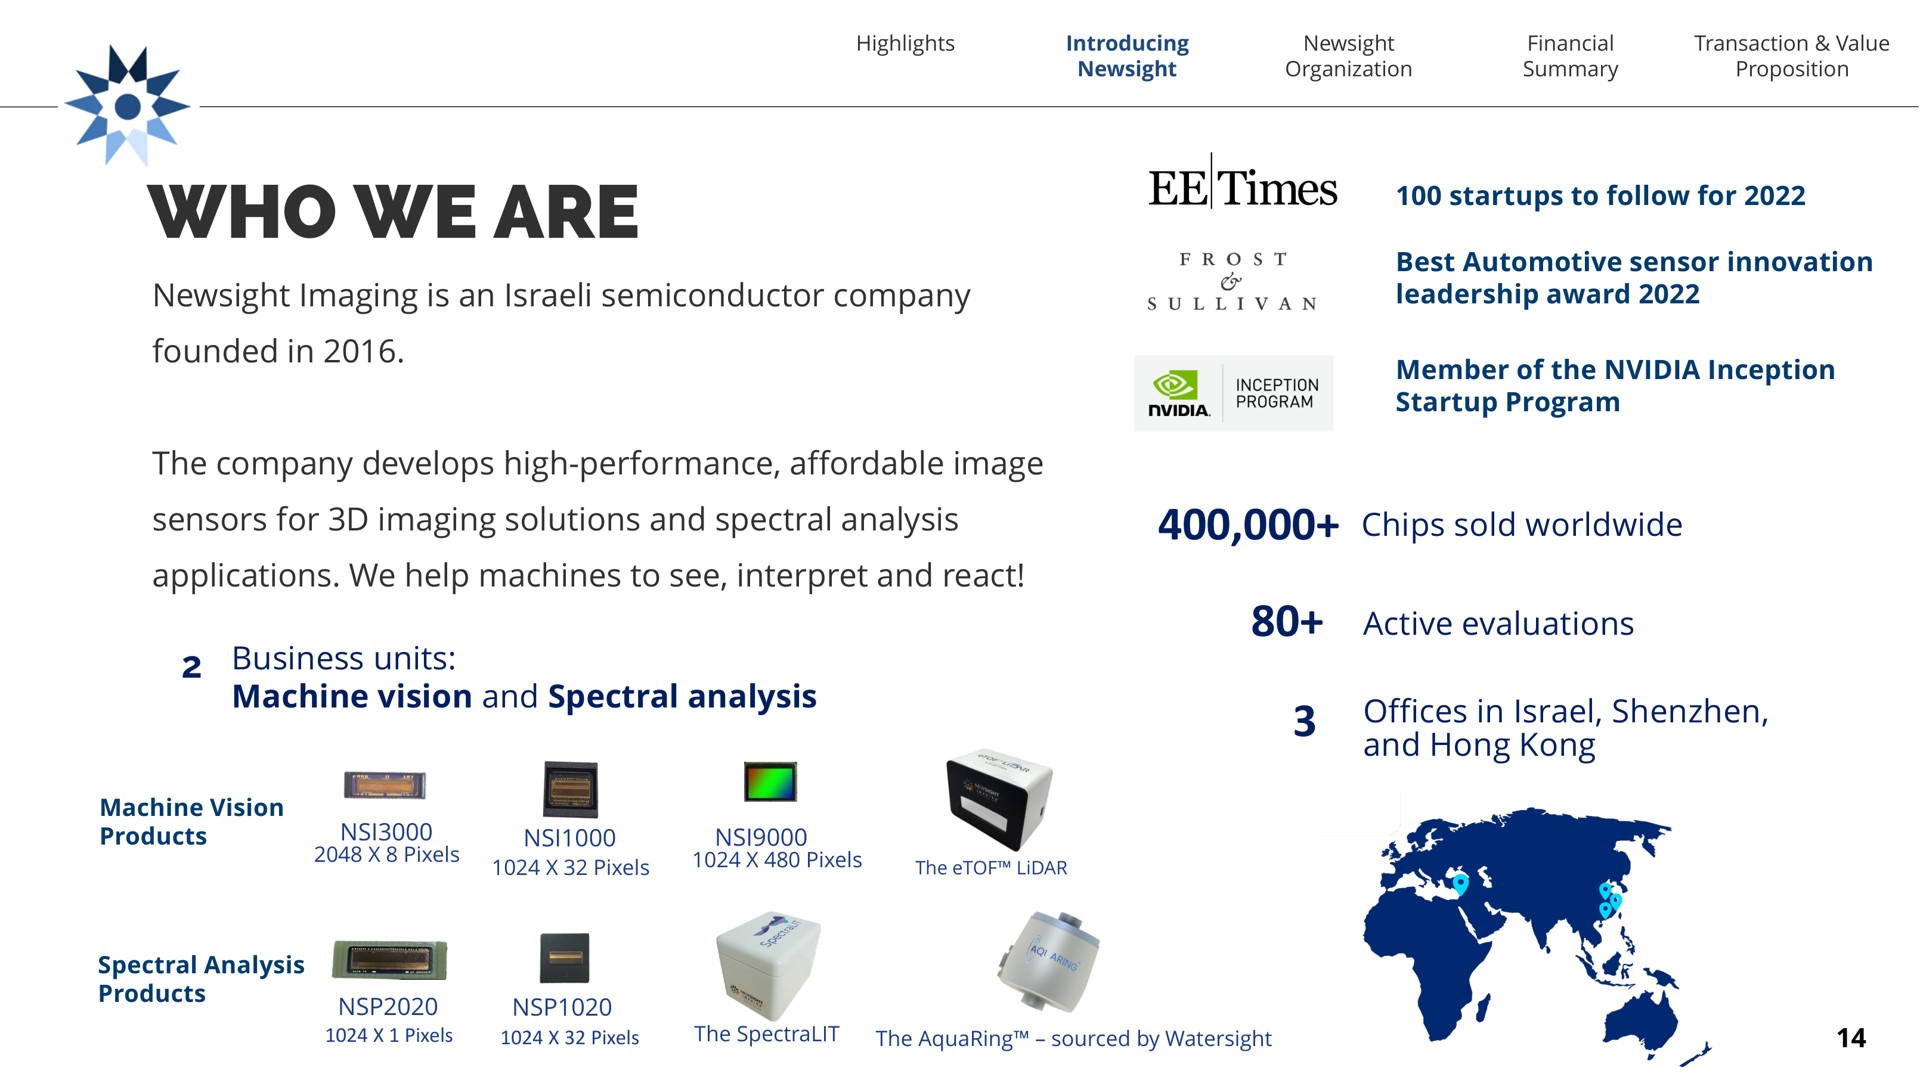 who we are imaging is an semiconductor company founded in to follow for best automotive sensor innovation leadership award member of the inception program the company develops high performance affordable image sensors for imaging solutions and spectral analysis chips sold applications we help machines to see interpret and react business units machine vision and spectral analysis machine vision products active evaluations offices in and hong spectral analysis products times go mage i | Newsight Imaging